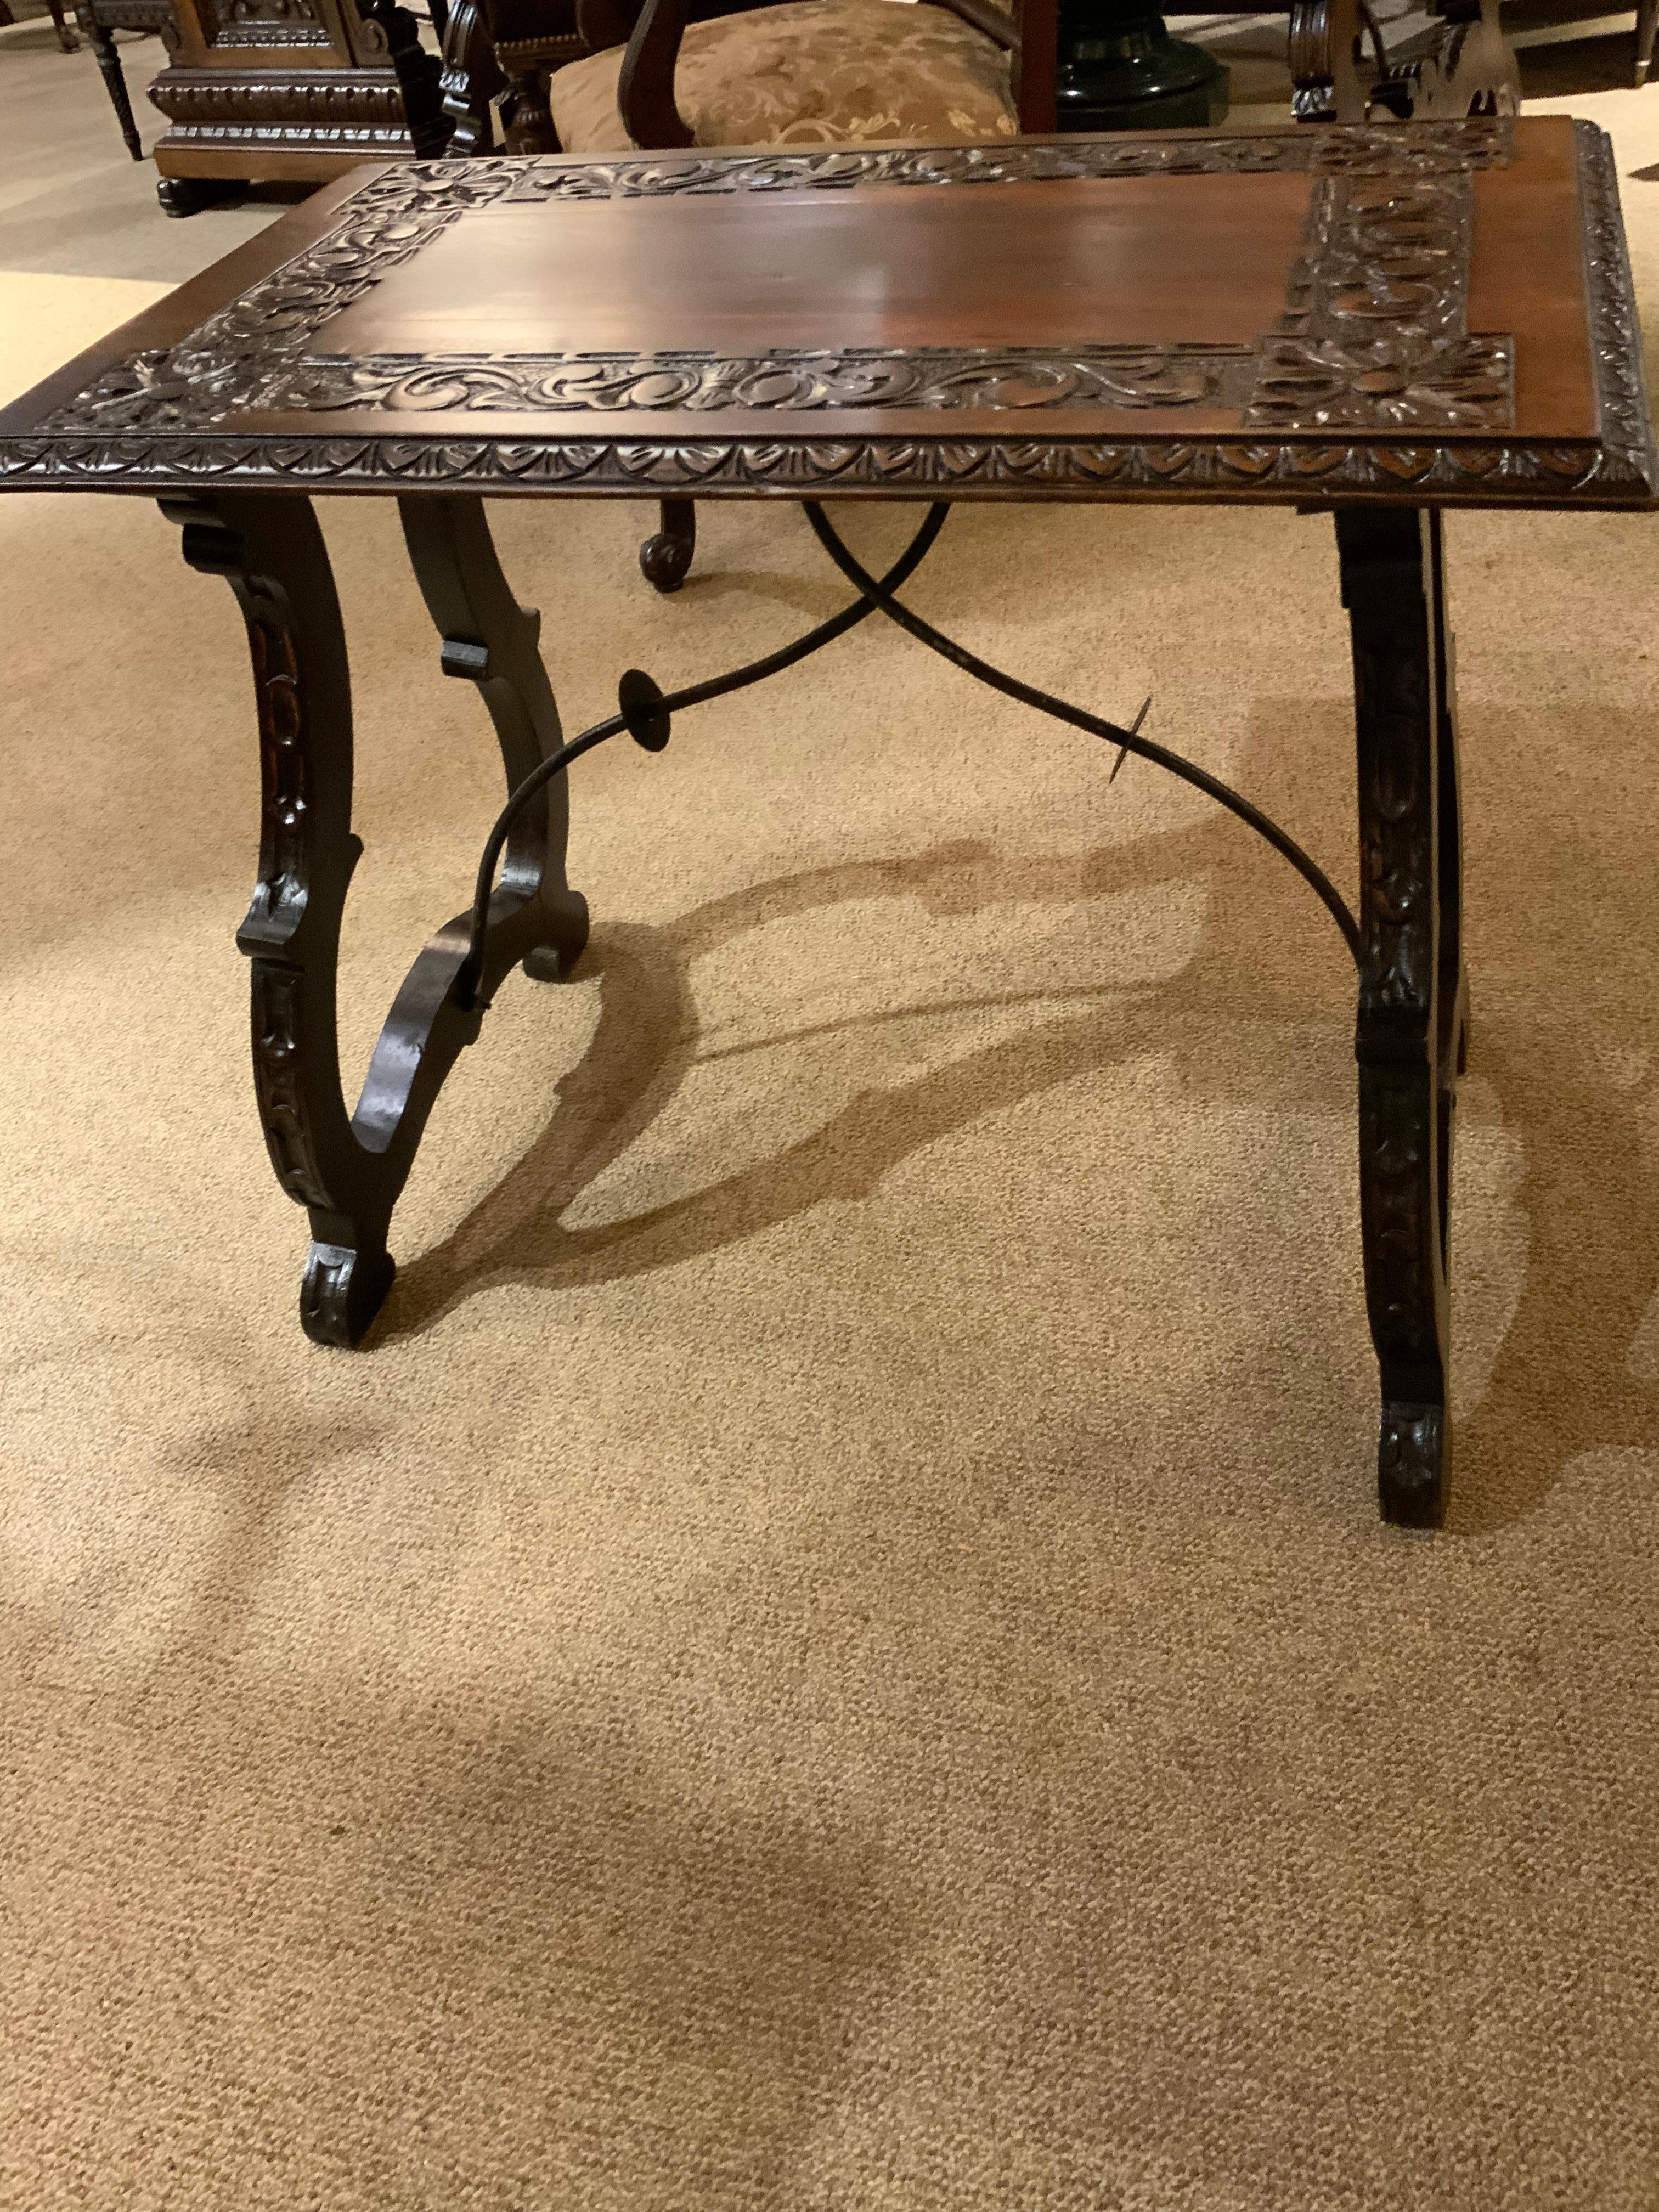 Spanish side table or occasional table with exceptional carving
Enhances the rustic beauty of this piece. The top is carved
With a geometric pattern on all four corners. More carving
Surrounds the four sides. The legs are curved and have 
Carved